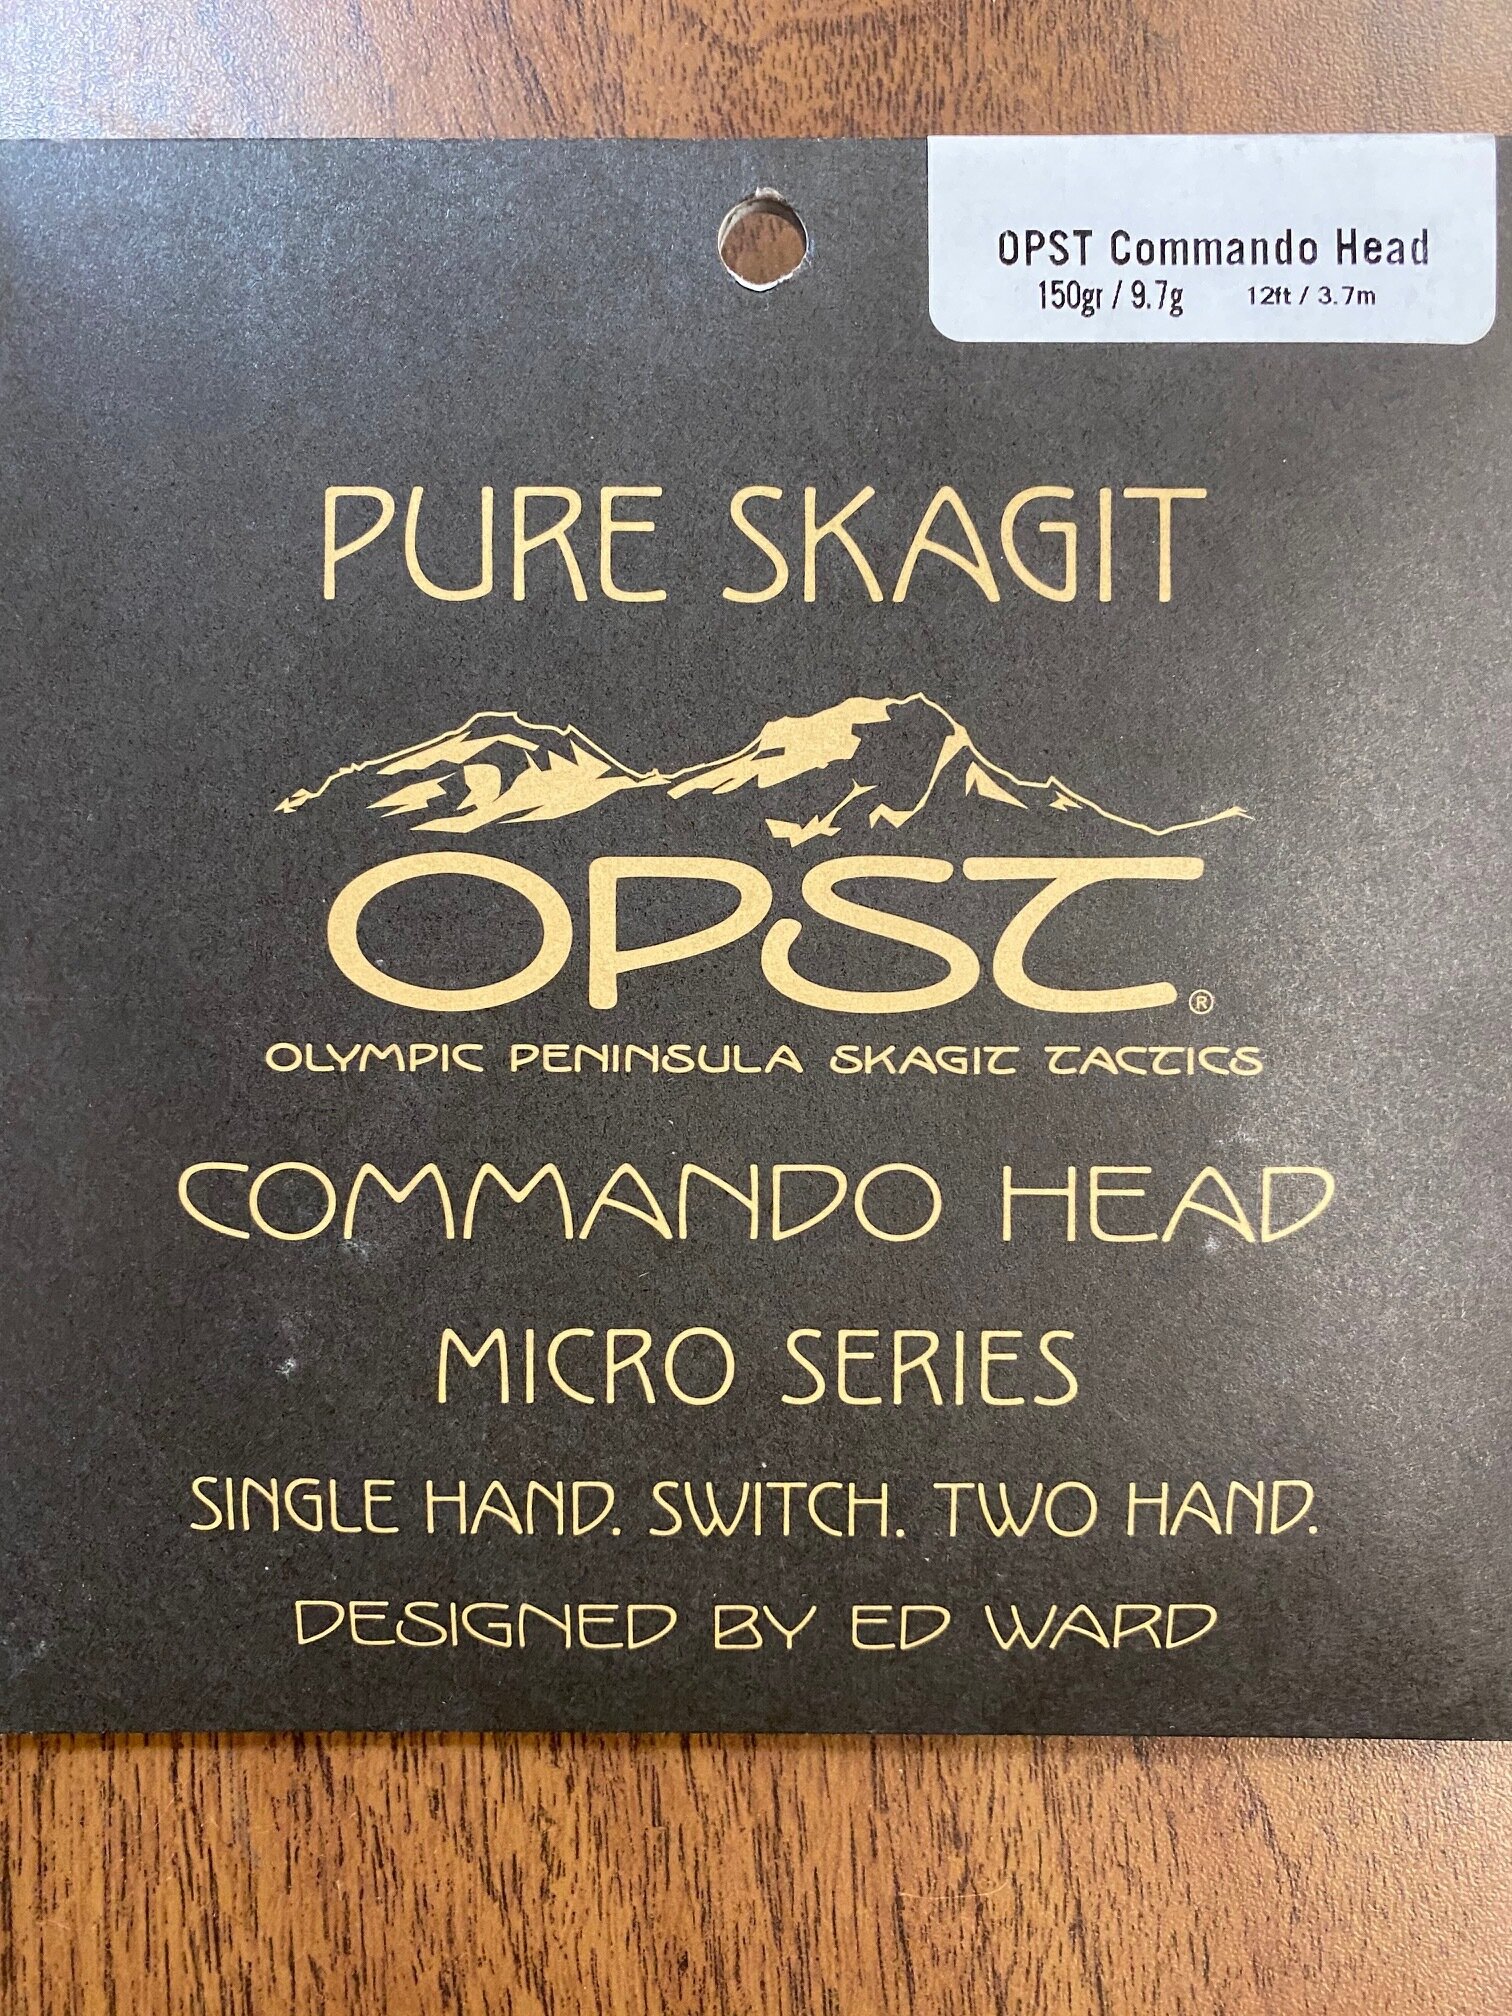 OPST Two-Handed Rods - Micro Skagit – OLYMPIC PENINSULA SKAGIT TACTICS